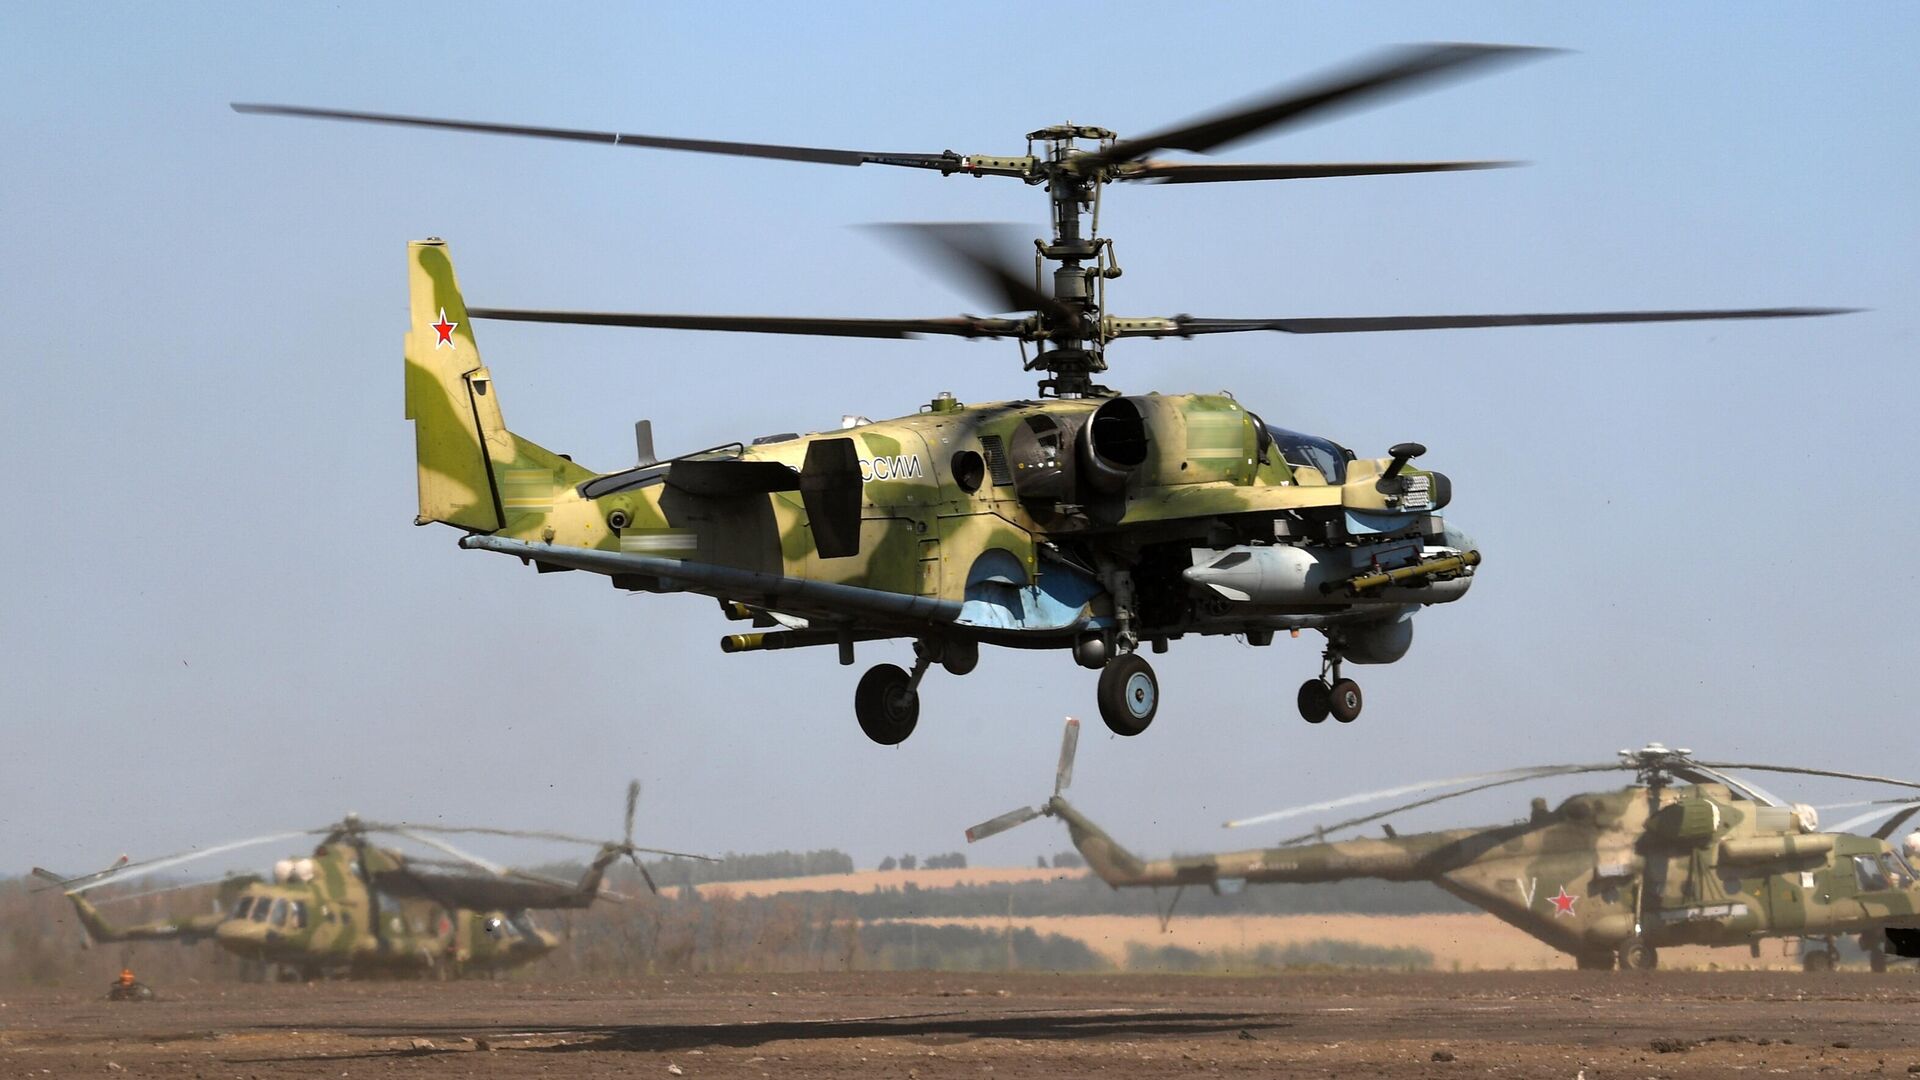             LAAD Defence and Security 2015 - Helicoptersu